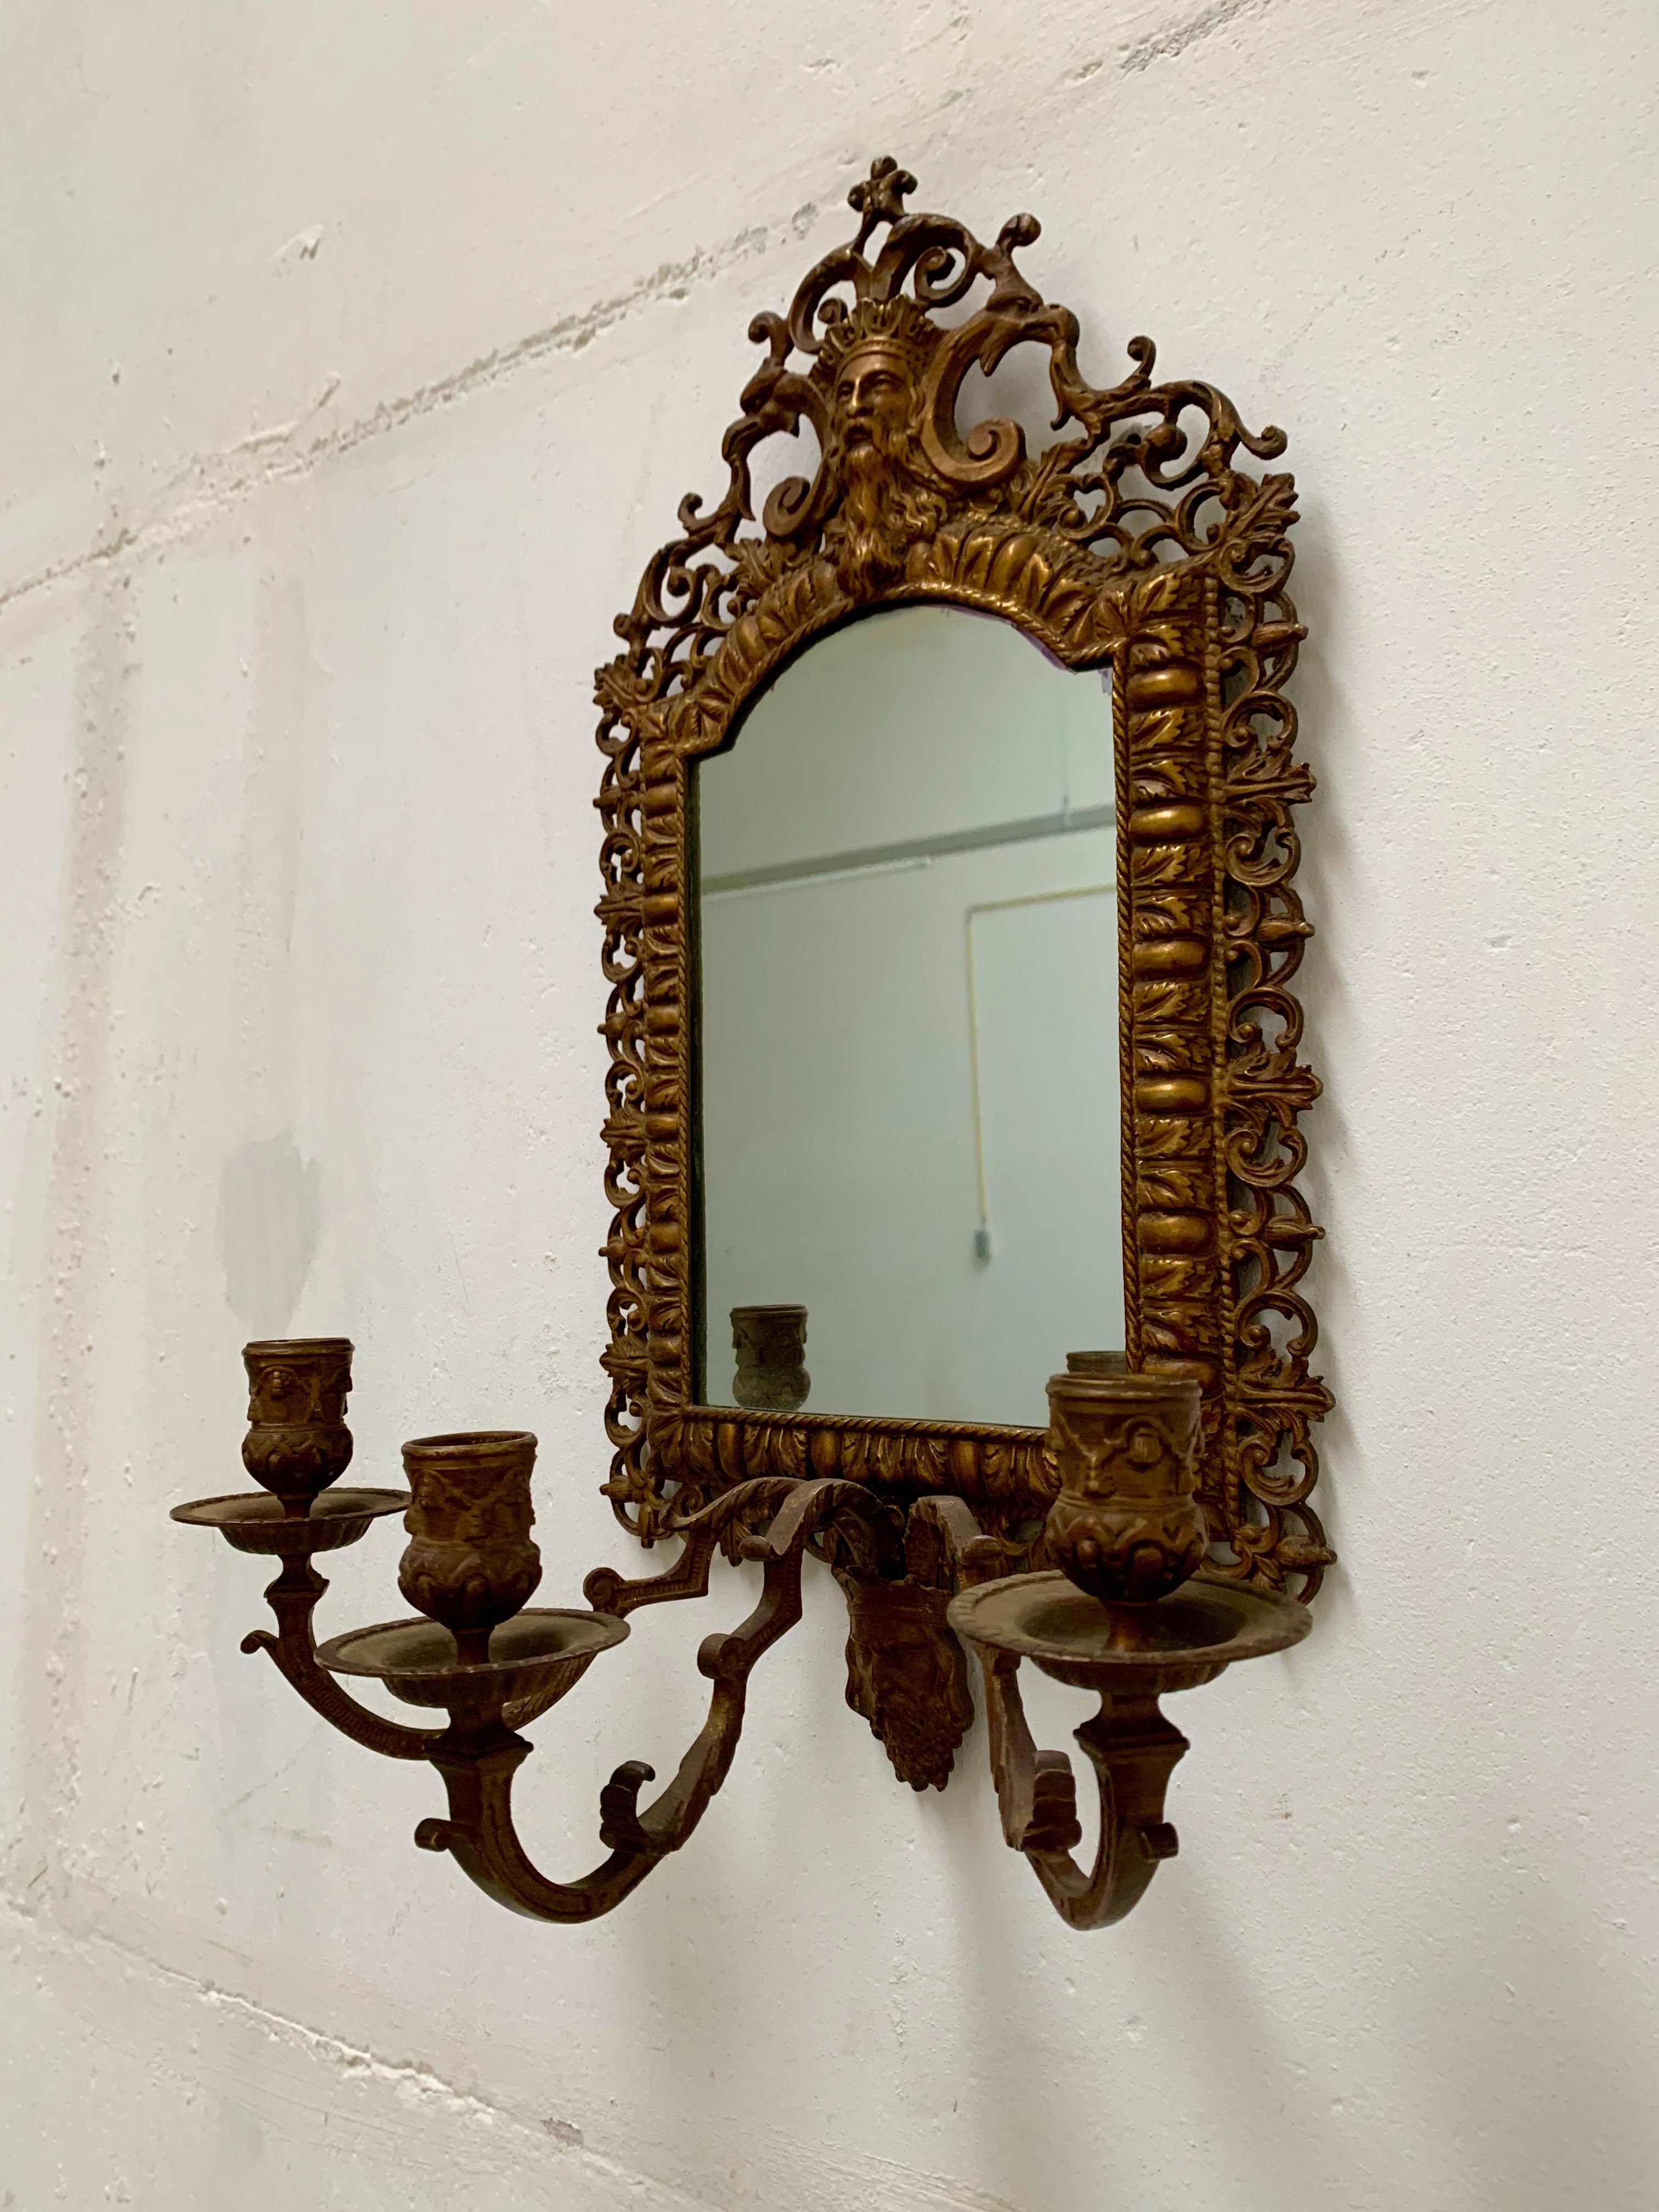 Antique mirror wall sconce with integrated candelabras.

This antique sconce is ideal for wall decoration and the look and feel is just wonderful. The impressive, cast bronze heads or masks on top and at the bottom are of a quality and beaty that